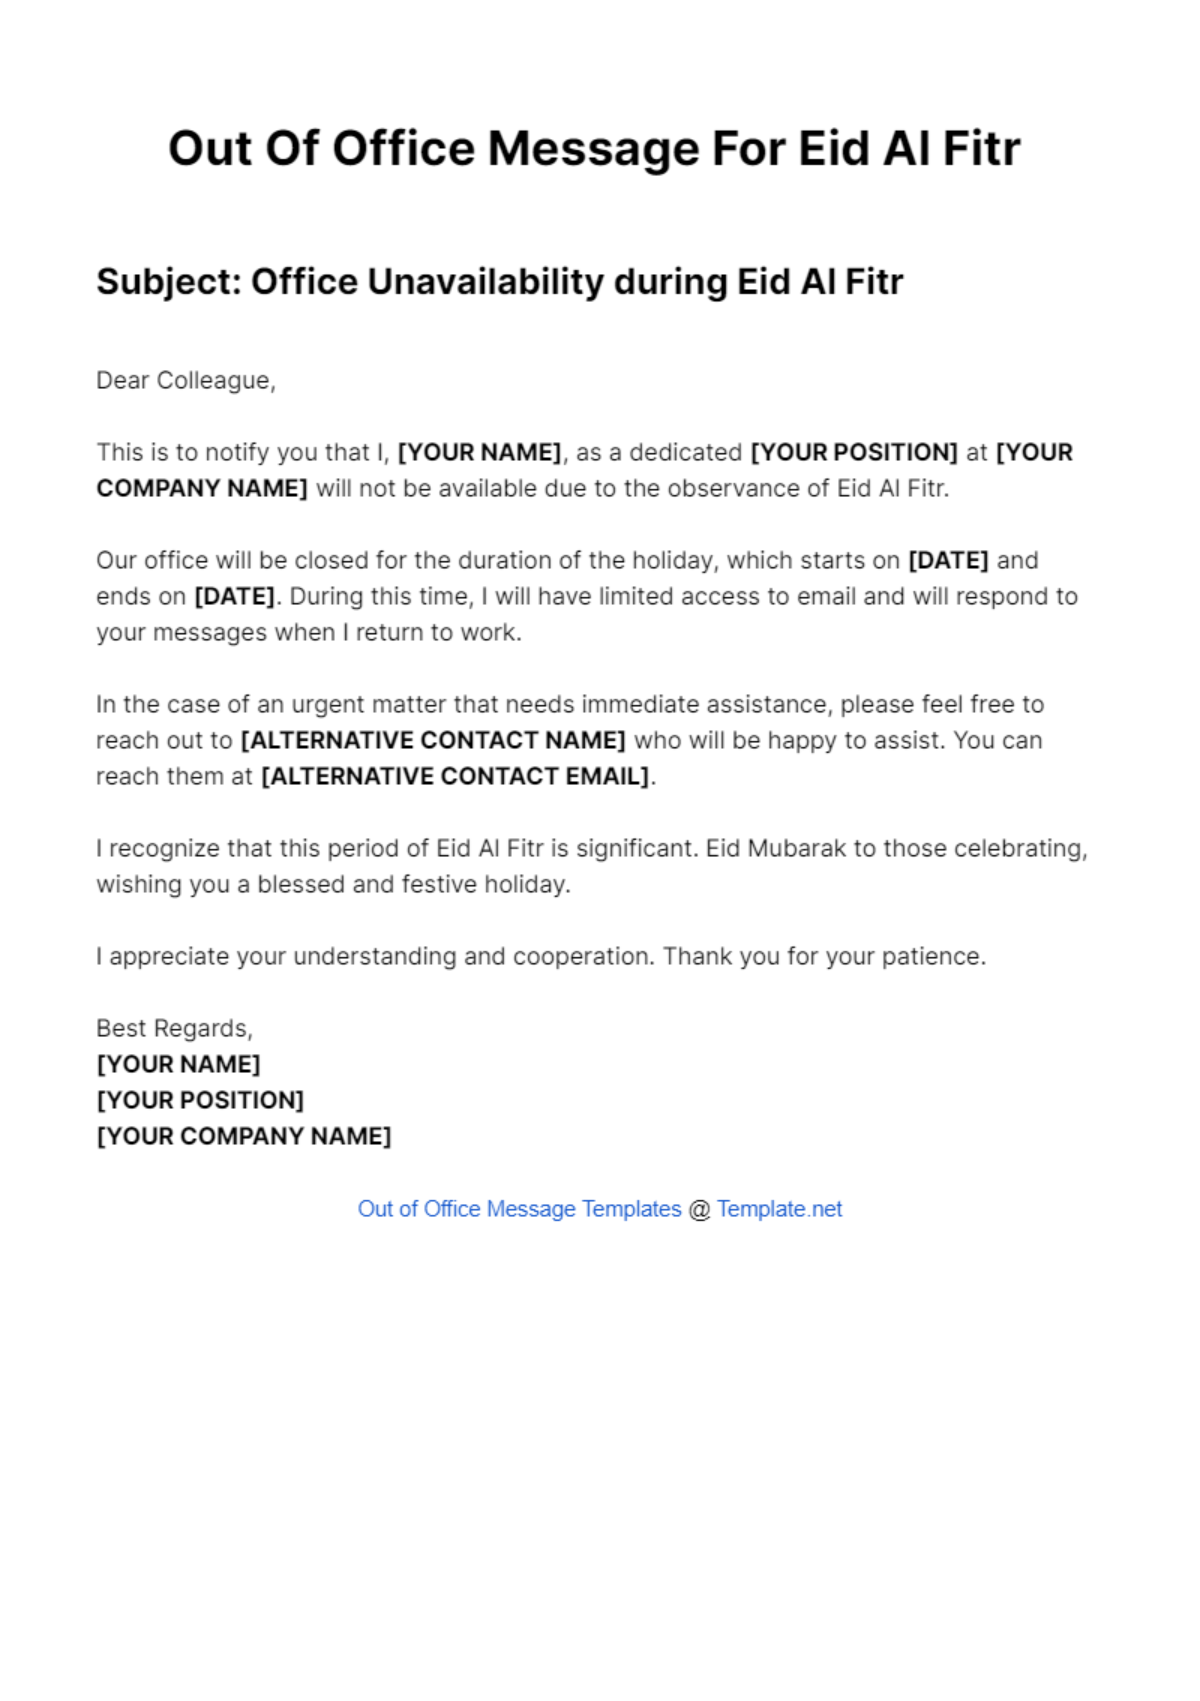 Free Out Of Office Message For Eid Al Fitr Template